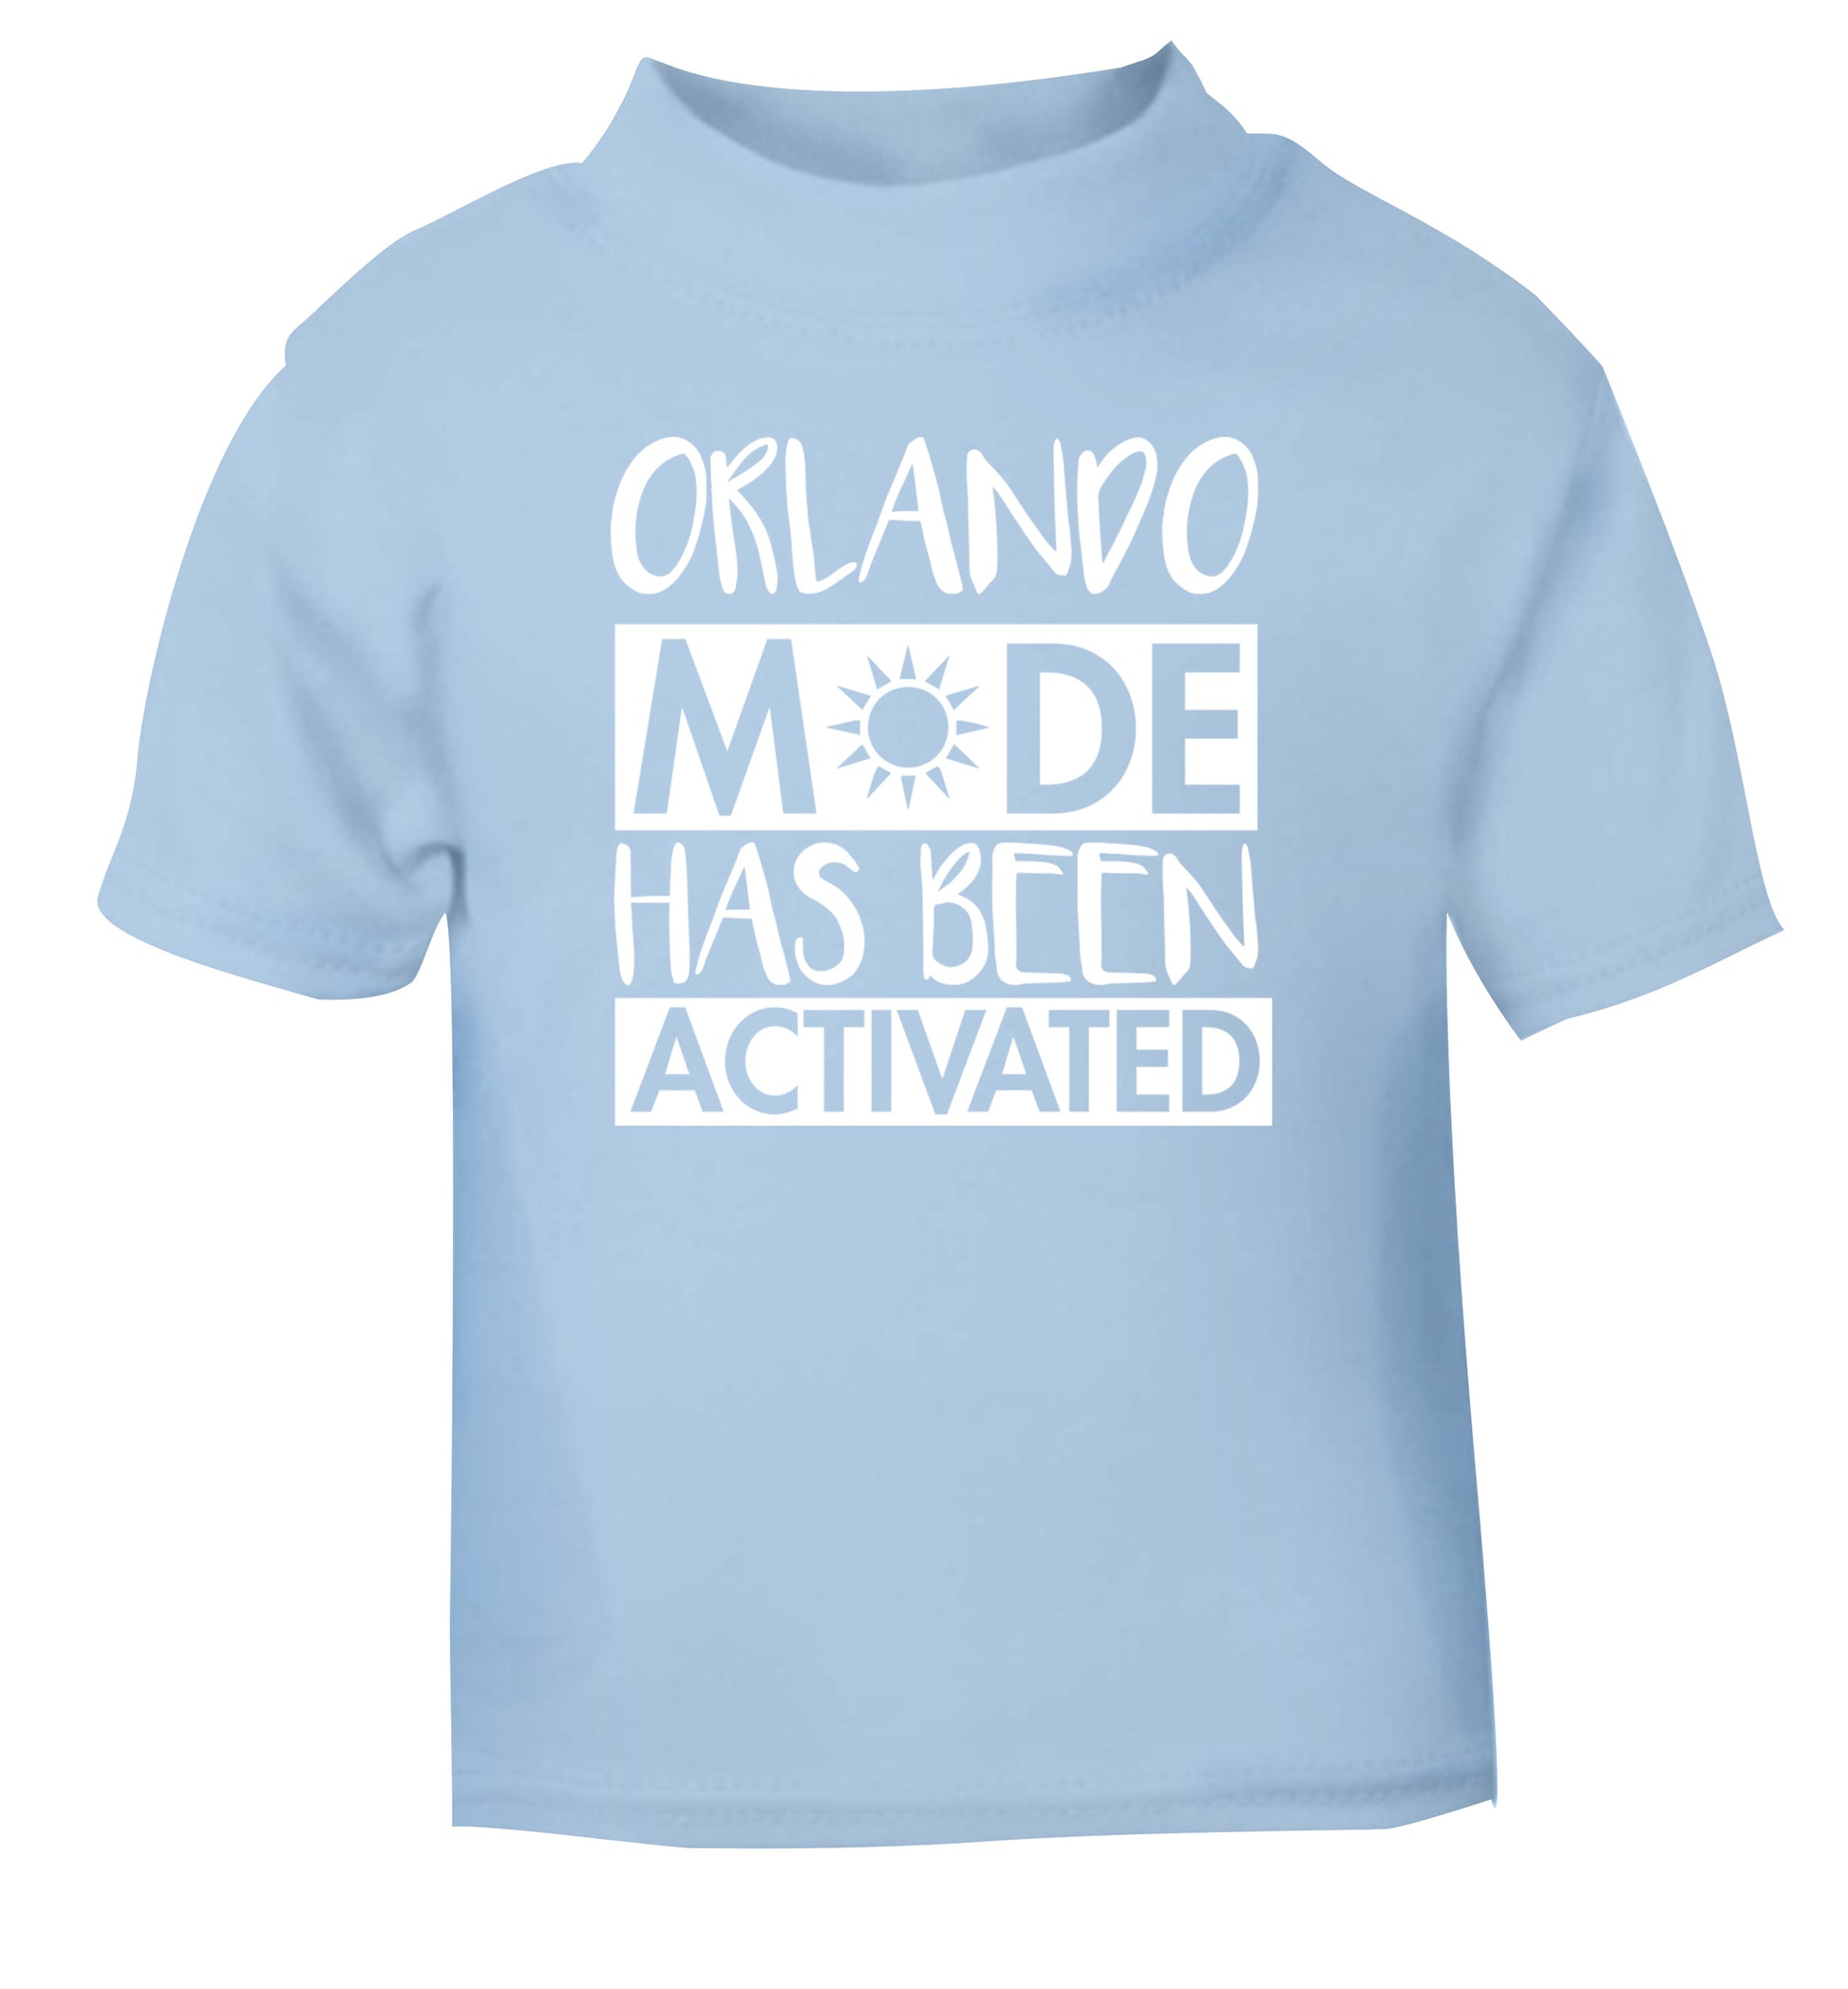 Orlando mode has been activated light blue Baby Toddler Tshirt 2 Years